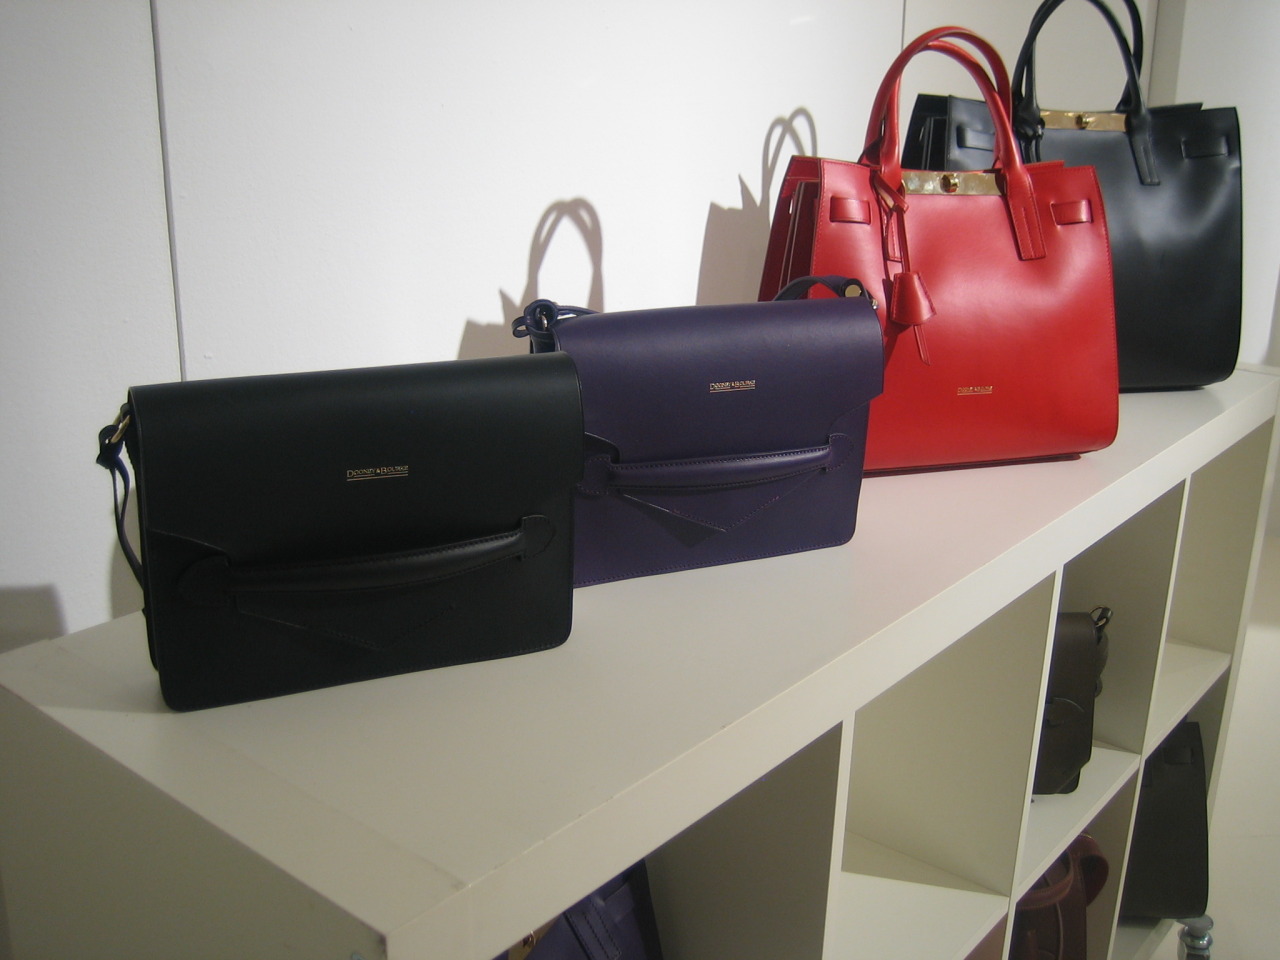 Dooney & Bourke Fall 2015 Preview